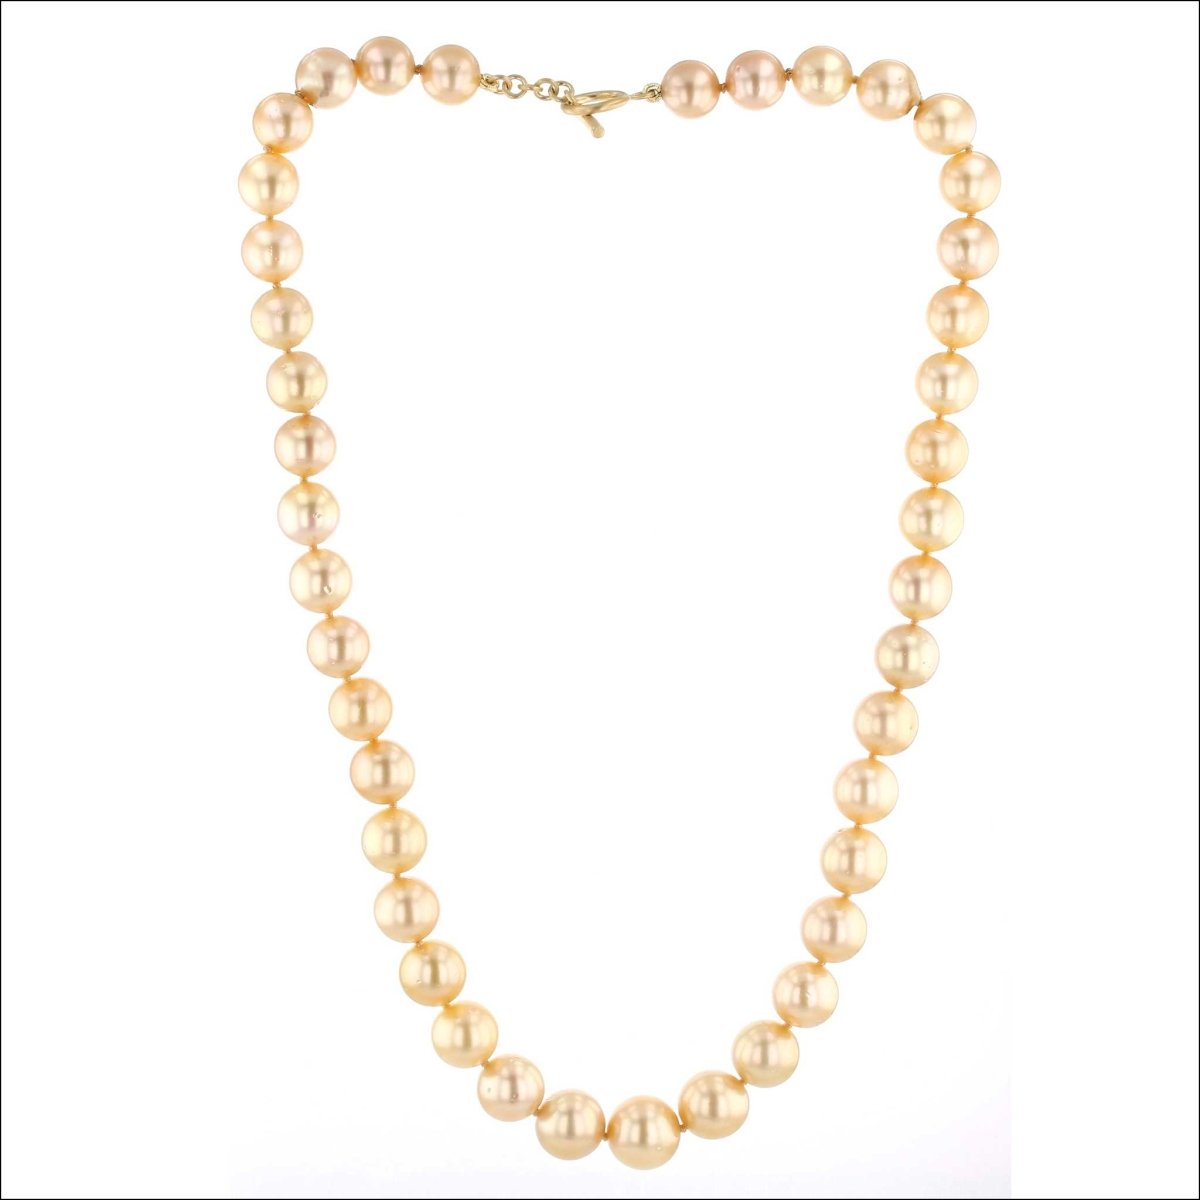 Golden South Sea Pearl Strand Necklace 18" 18KY - JewelsmithNecklaces